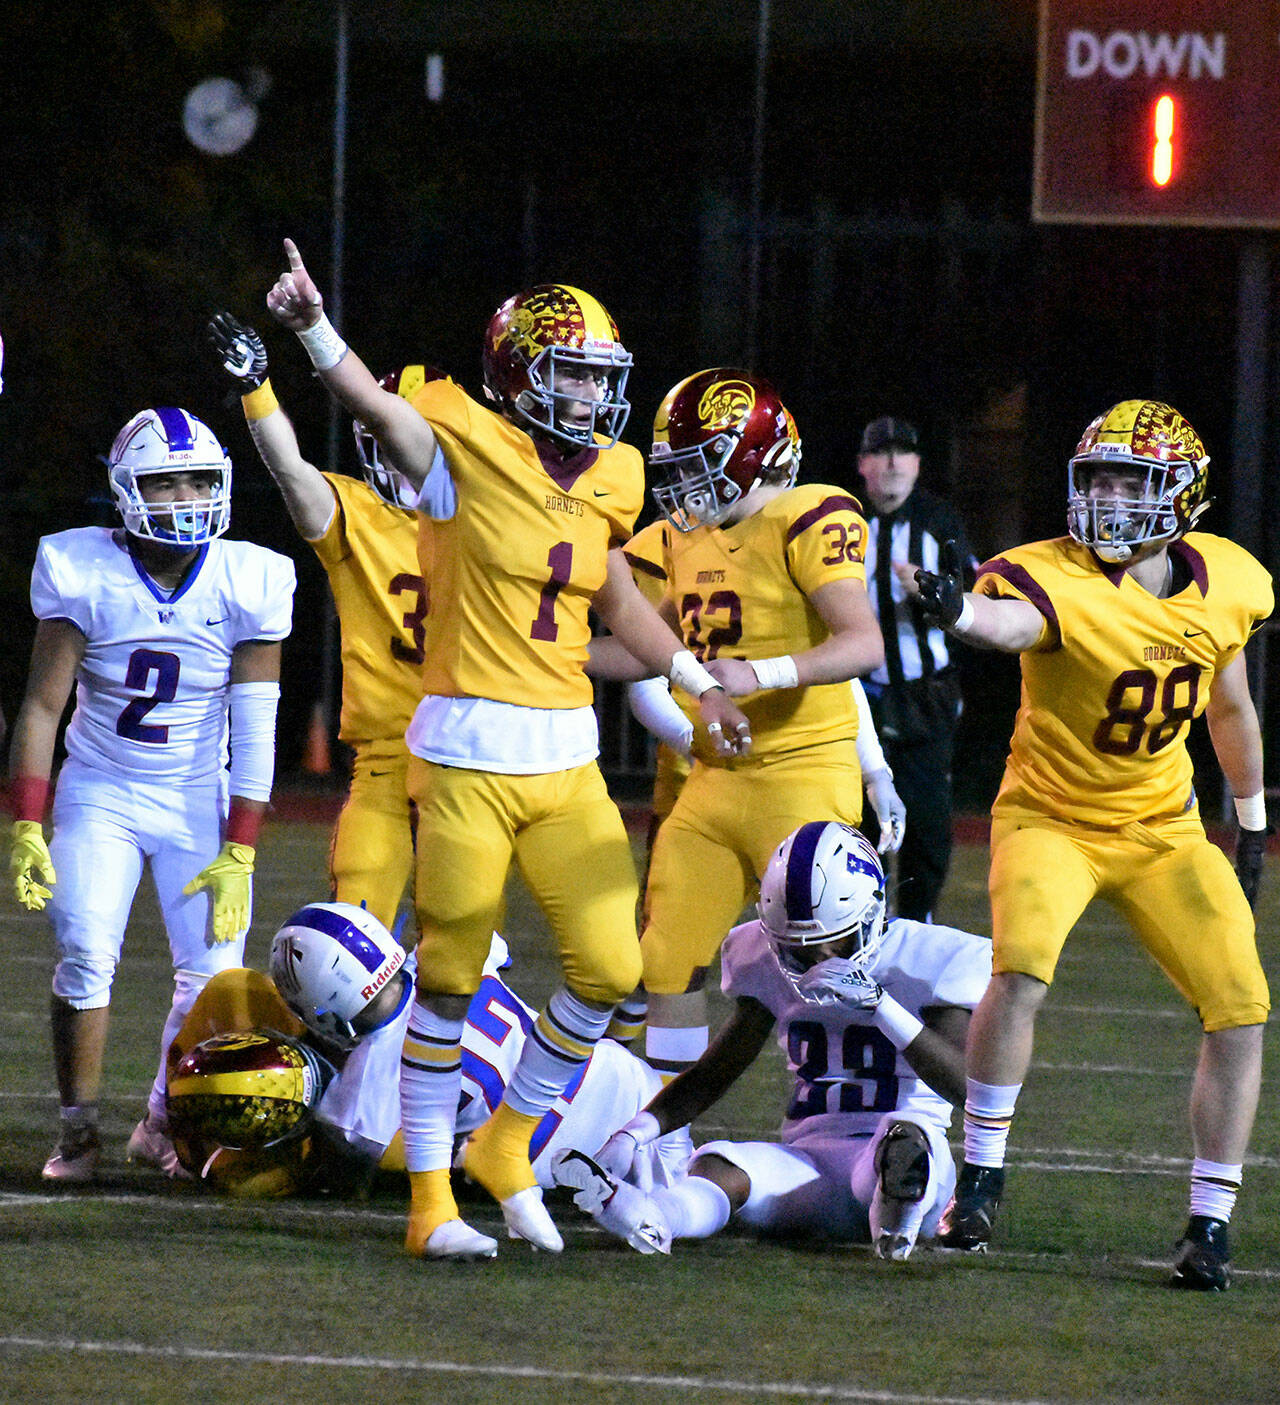 Enumclaw’s Clive Pond (1) and his Hornet teammates celebrate after recovering a Patriot fumble Friday night. Photo by Kevin Hanson